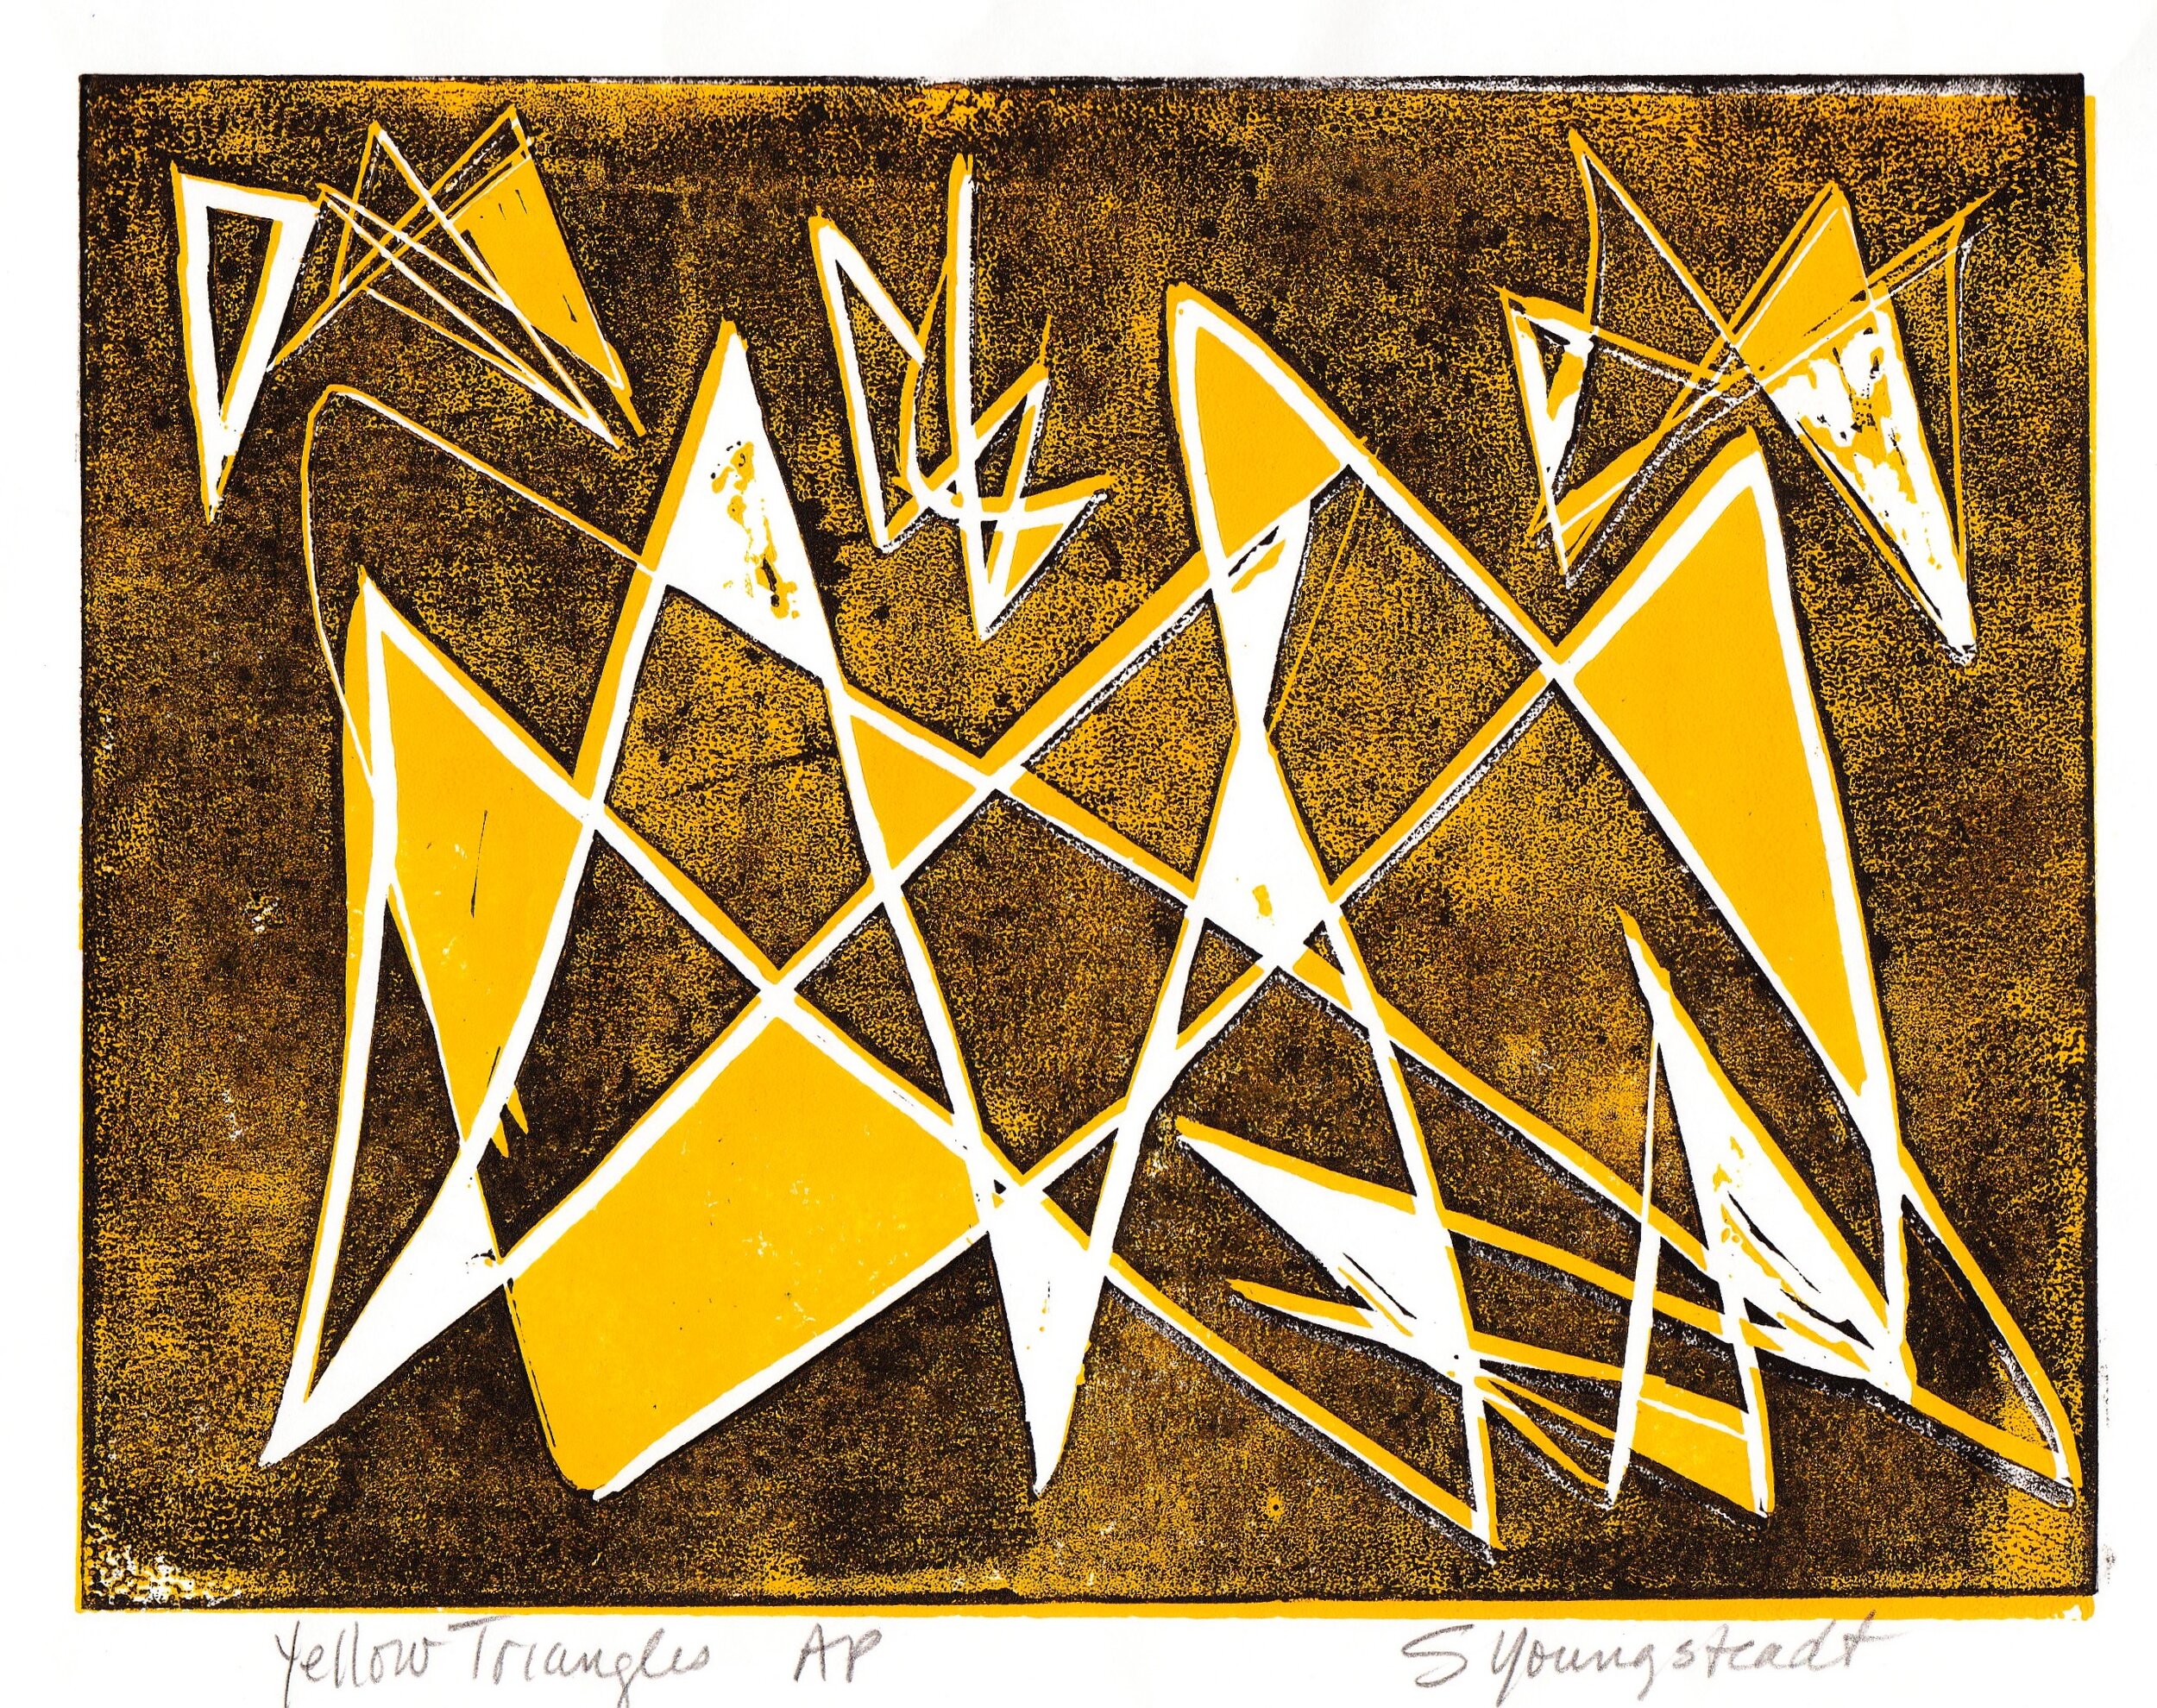 "Yellow Triangles"  by Susana Youngsteadt